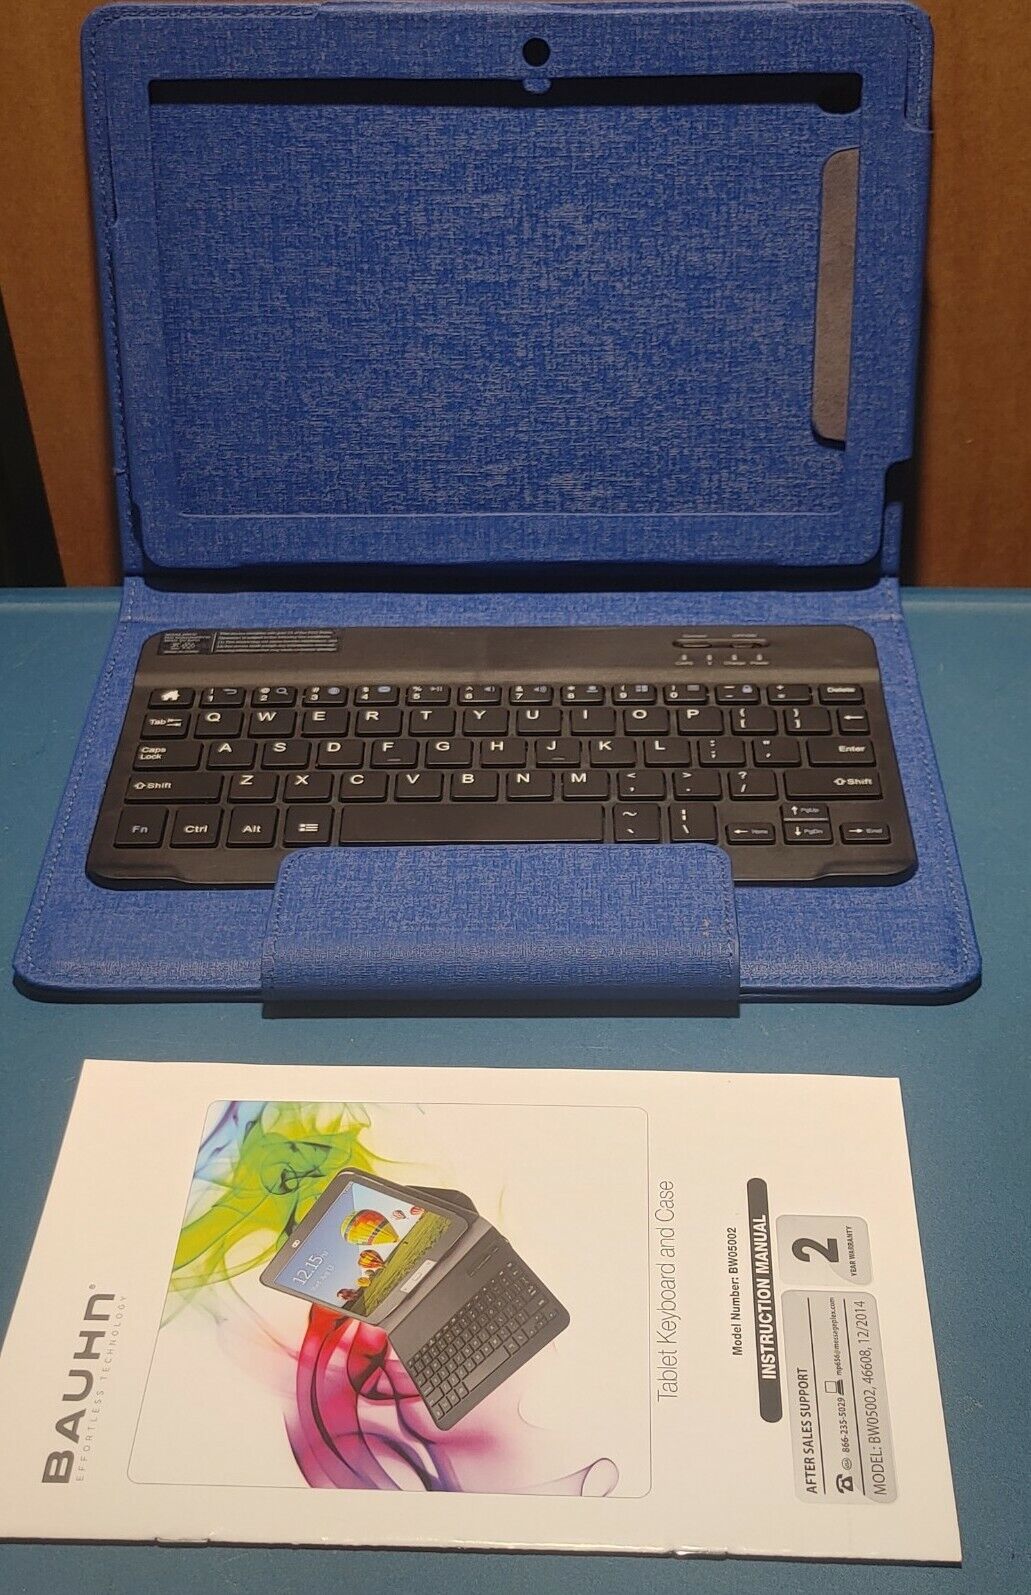 Bauhn Tablet keyboard and case for Galaxy Tab 3, Excellent Working Condition